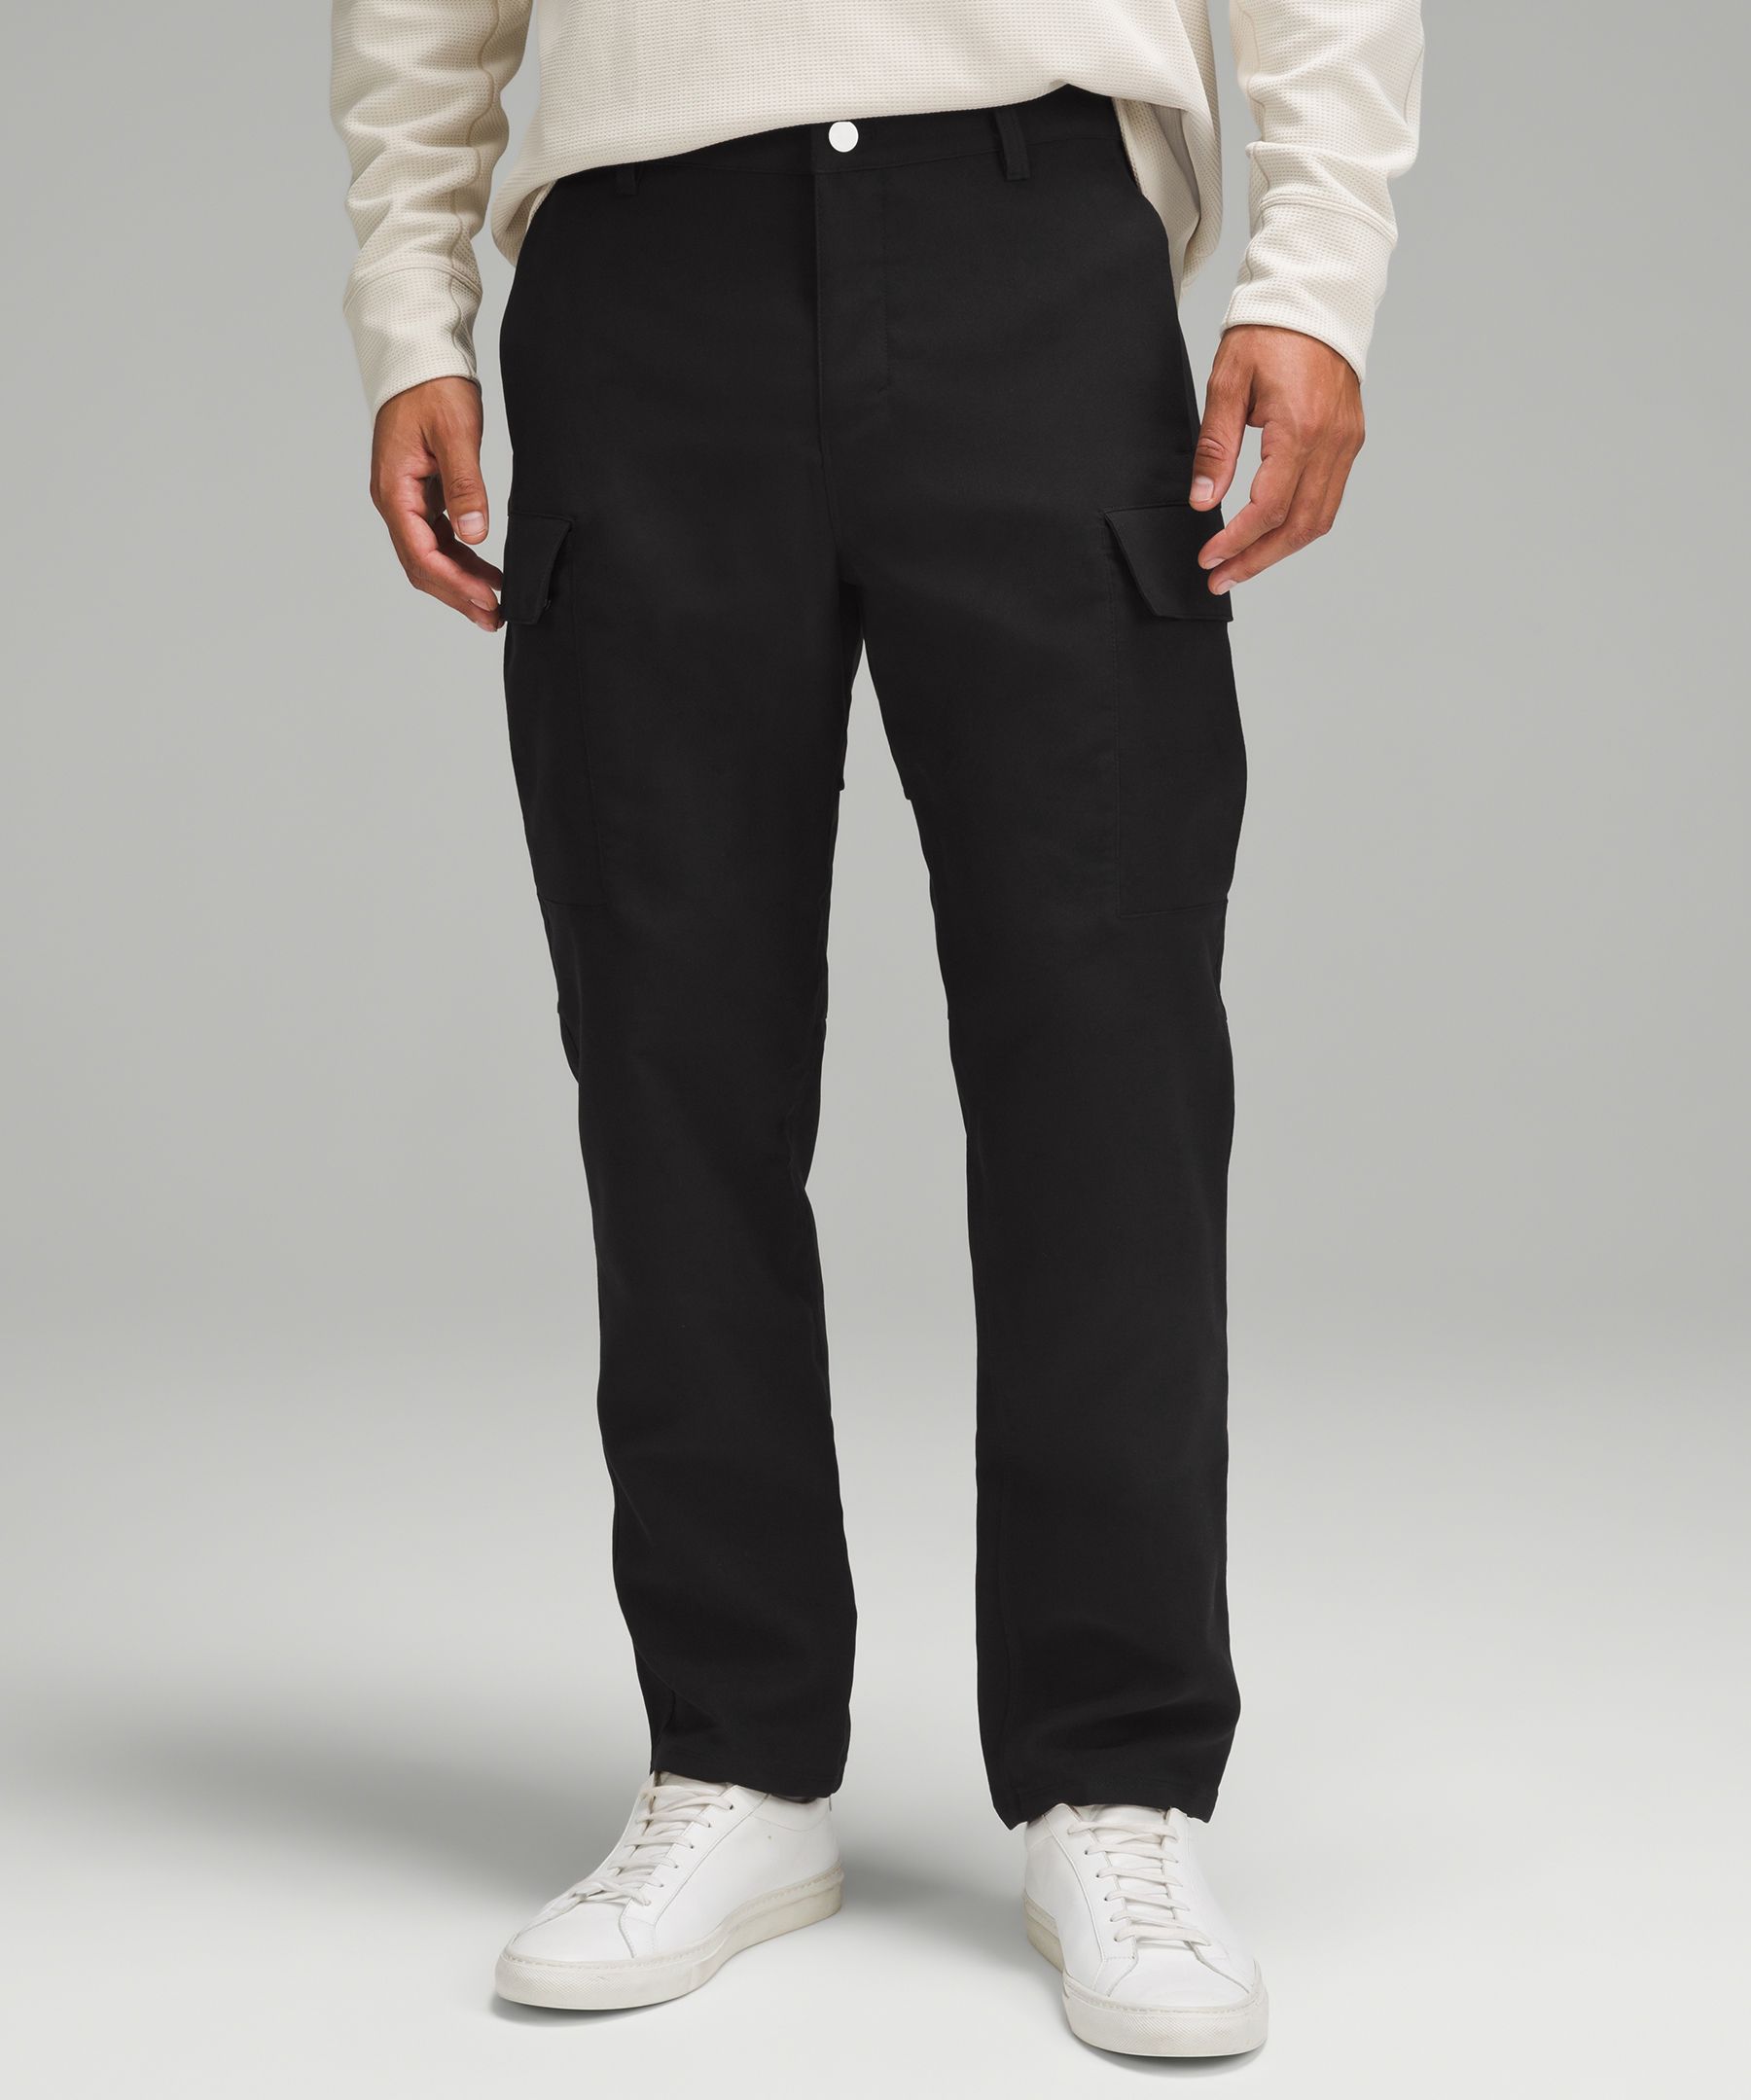 Lululemon Classic-Fit Sueded Cargo Pant